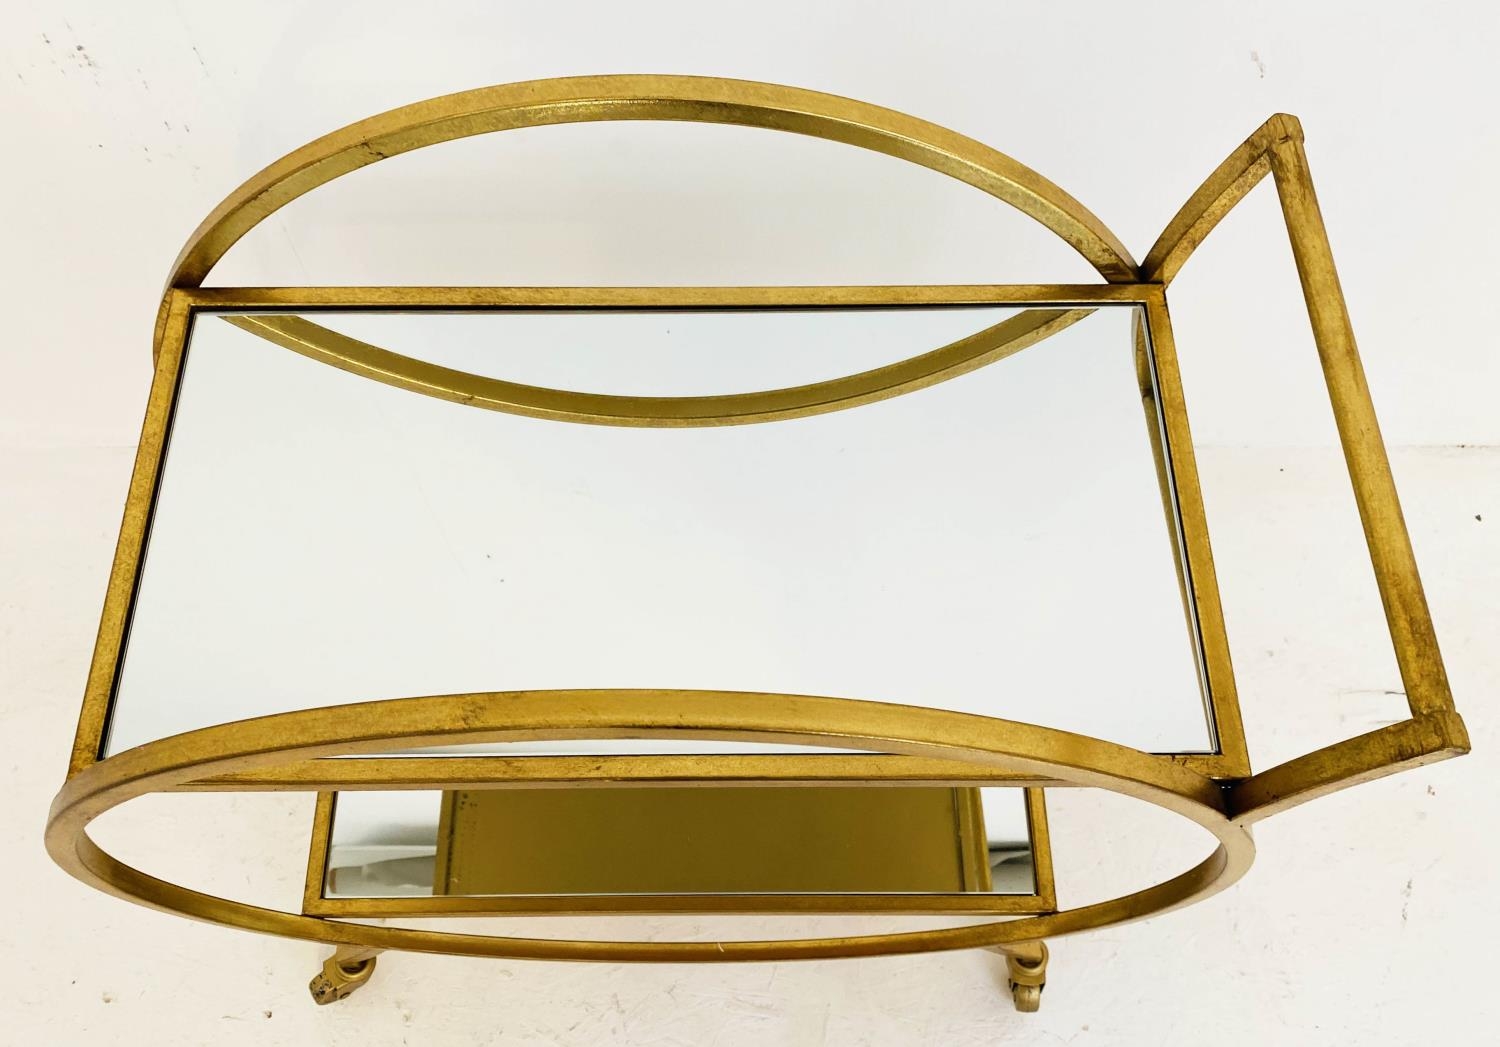 COCKTAIL TROLLEY, French art deco style, gilt metal, mirrored shelves, 75cm x 70cm x 34cm. - Image 3 of 5